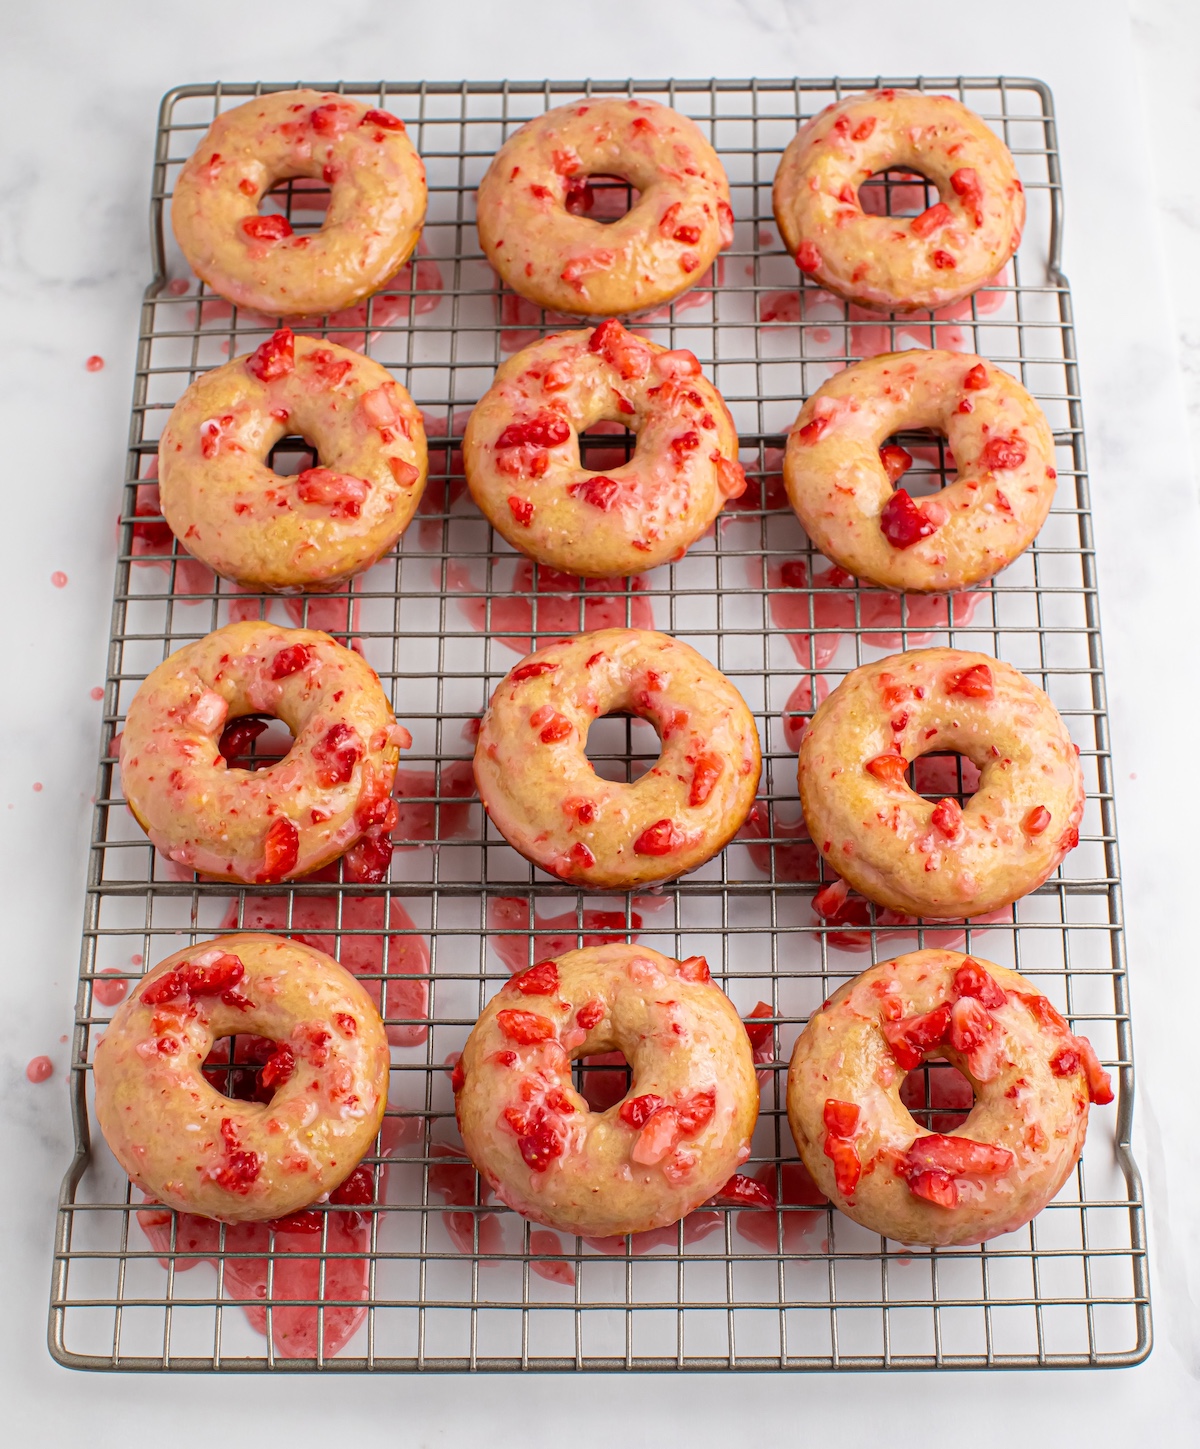 donuts with strawberry glaze cooling on a wire rack